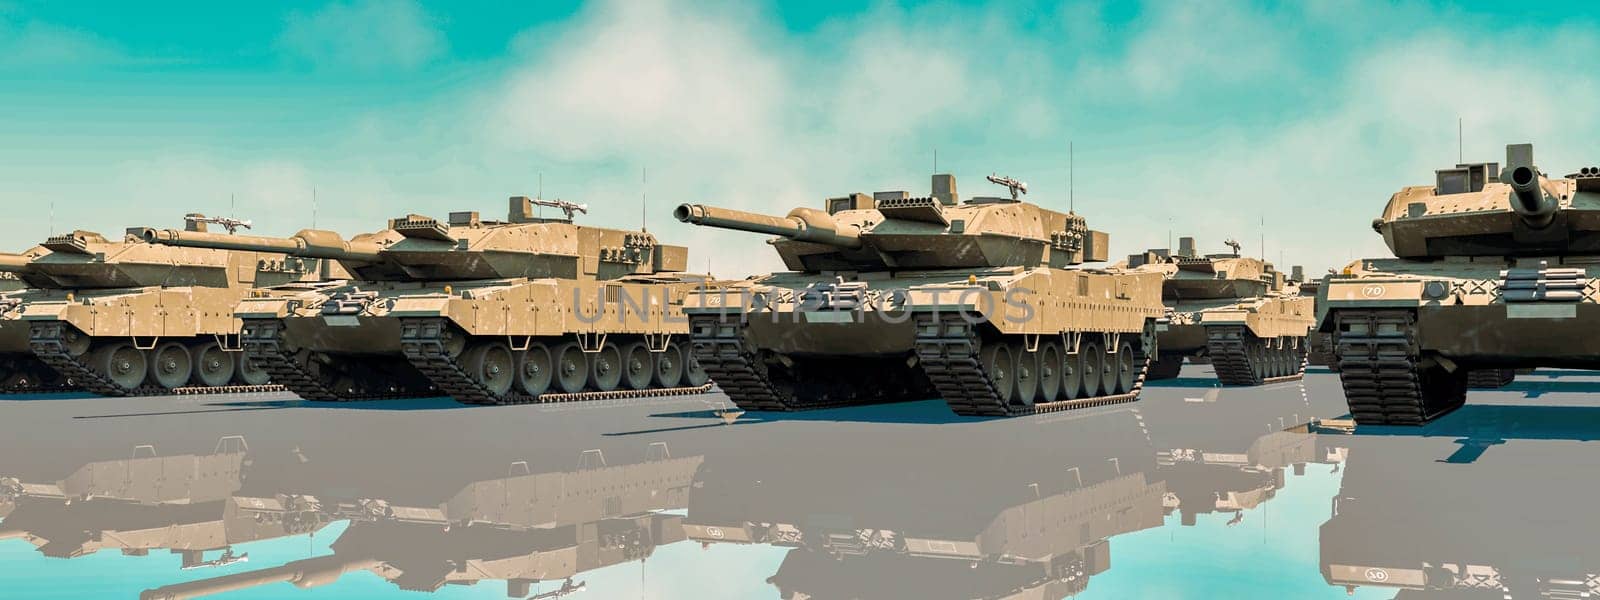 Armored Might: A Lineup of Main Battle Tanks Poised for Engagement by Juanjo39